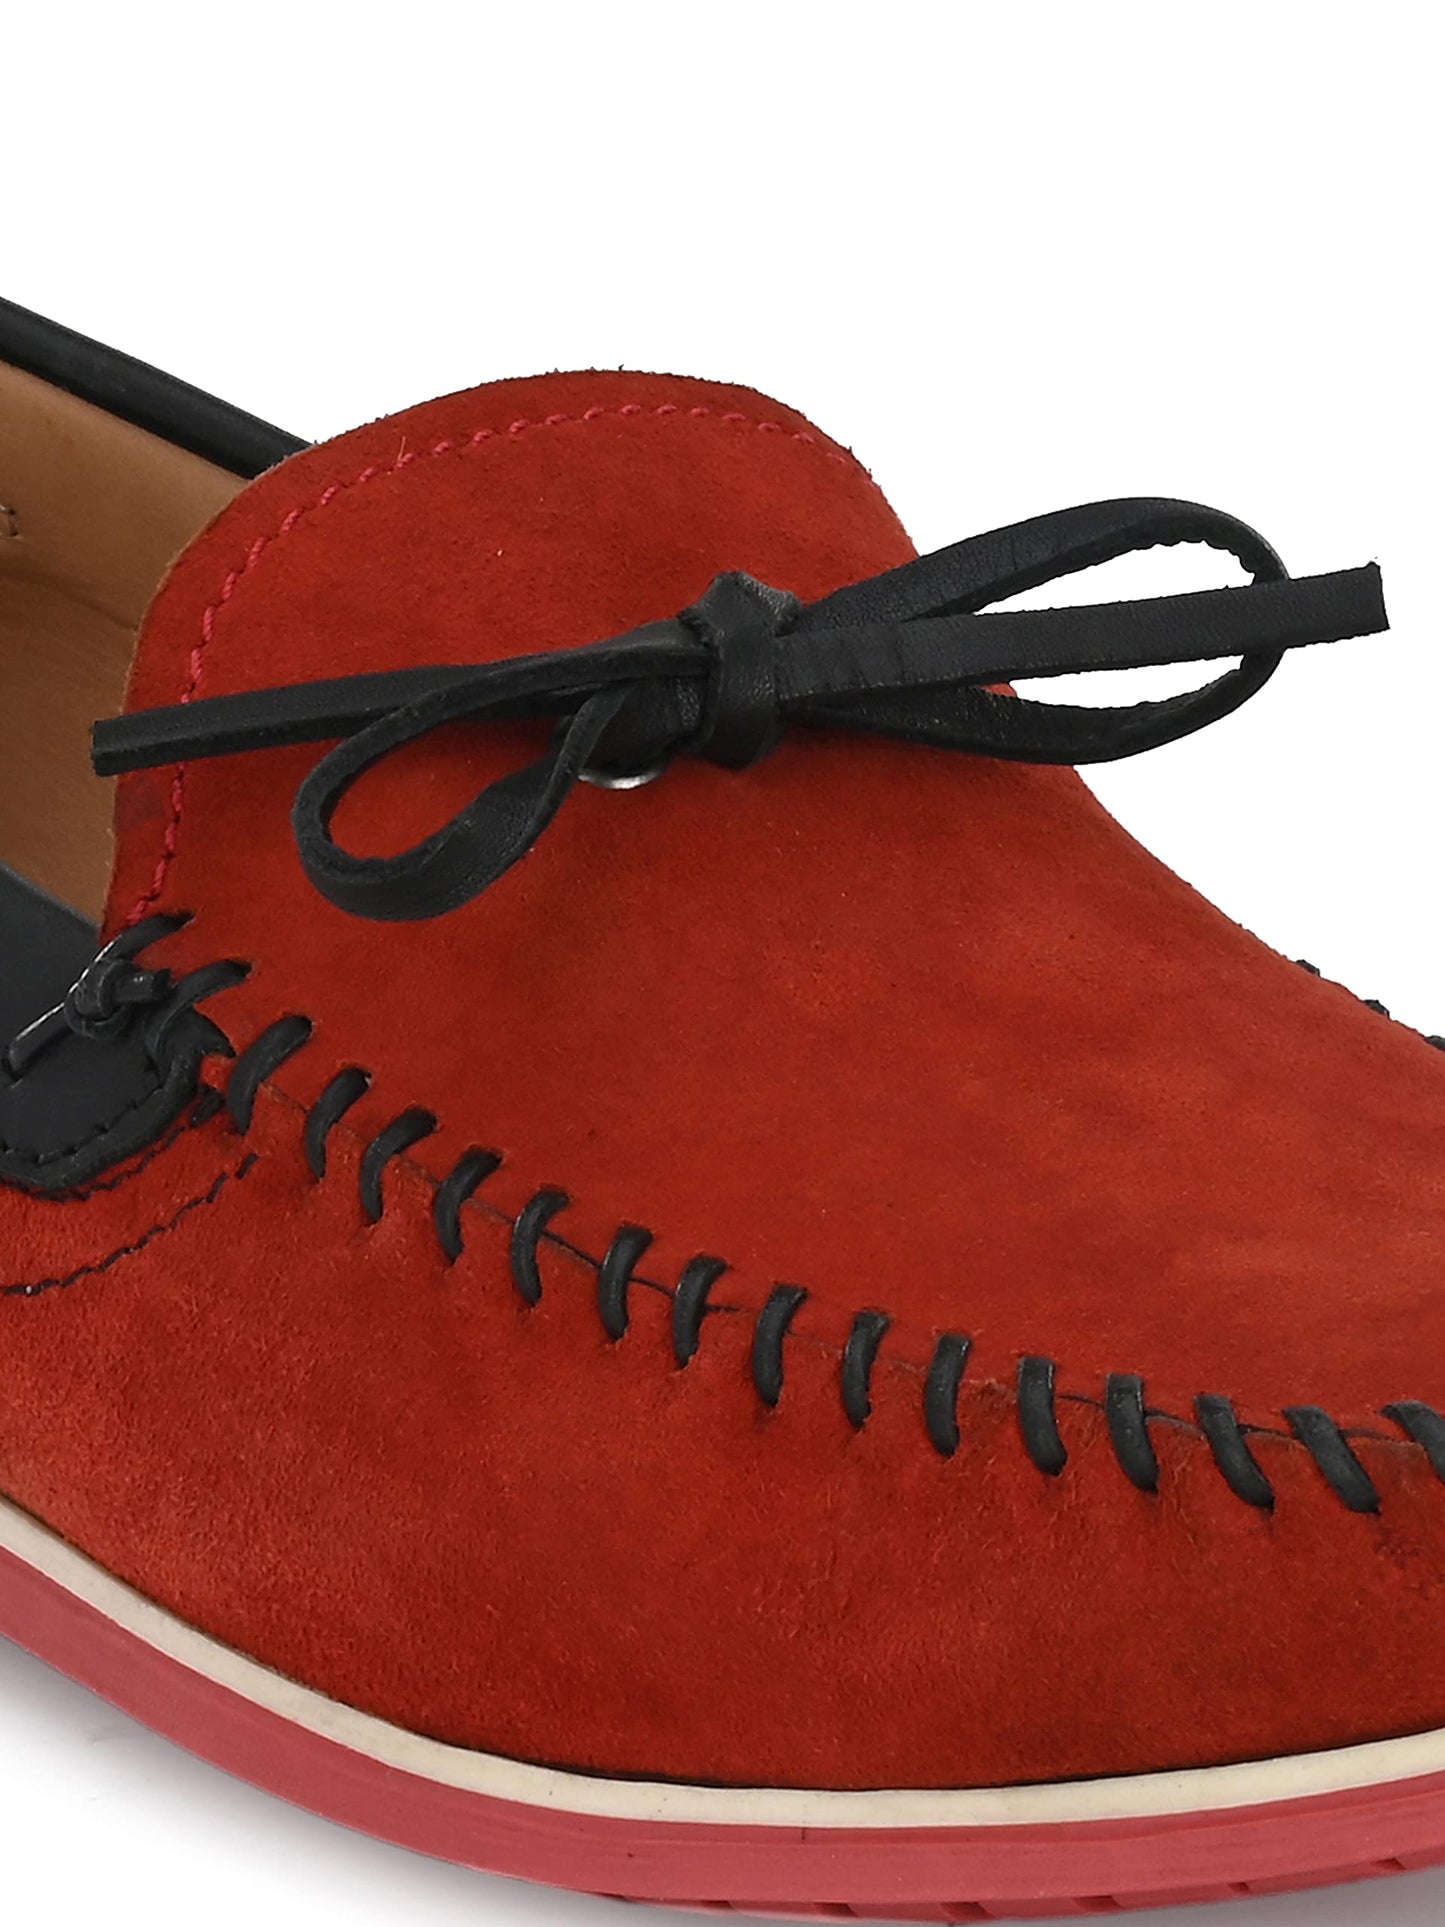 HITZ Men's Red Leather Moccasins Boat Shoes - 7